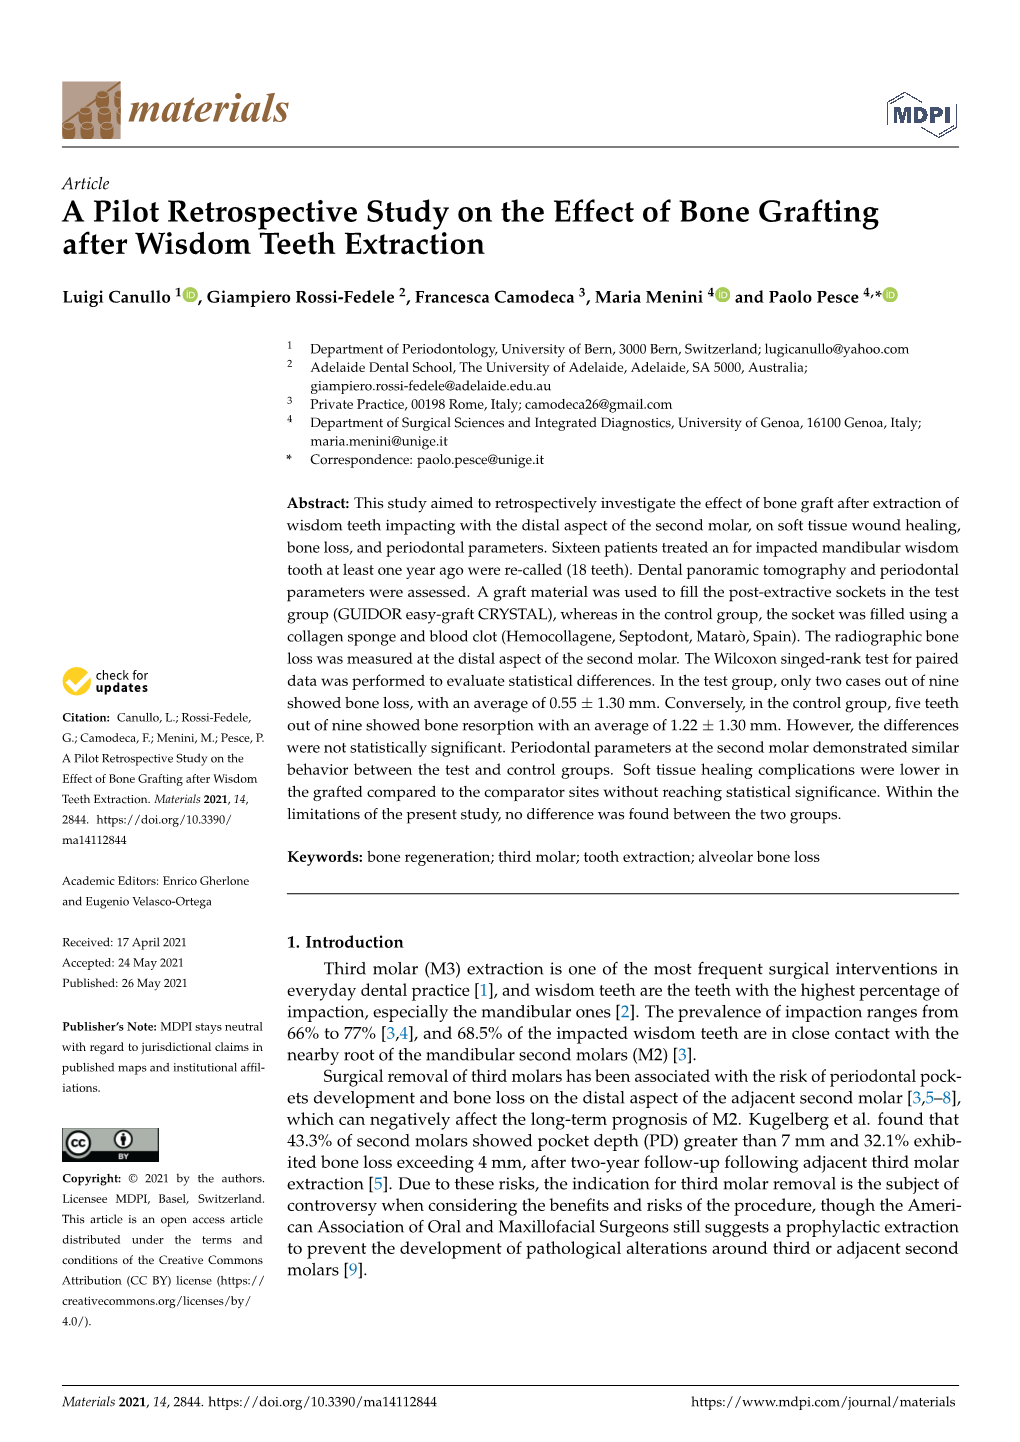 A Pilot Retrospective Study on the Effect of Bone Grafting After Wisdom Teeth Extraction